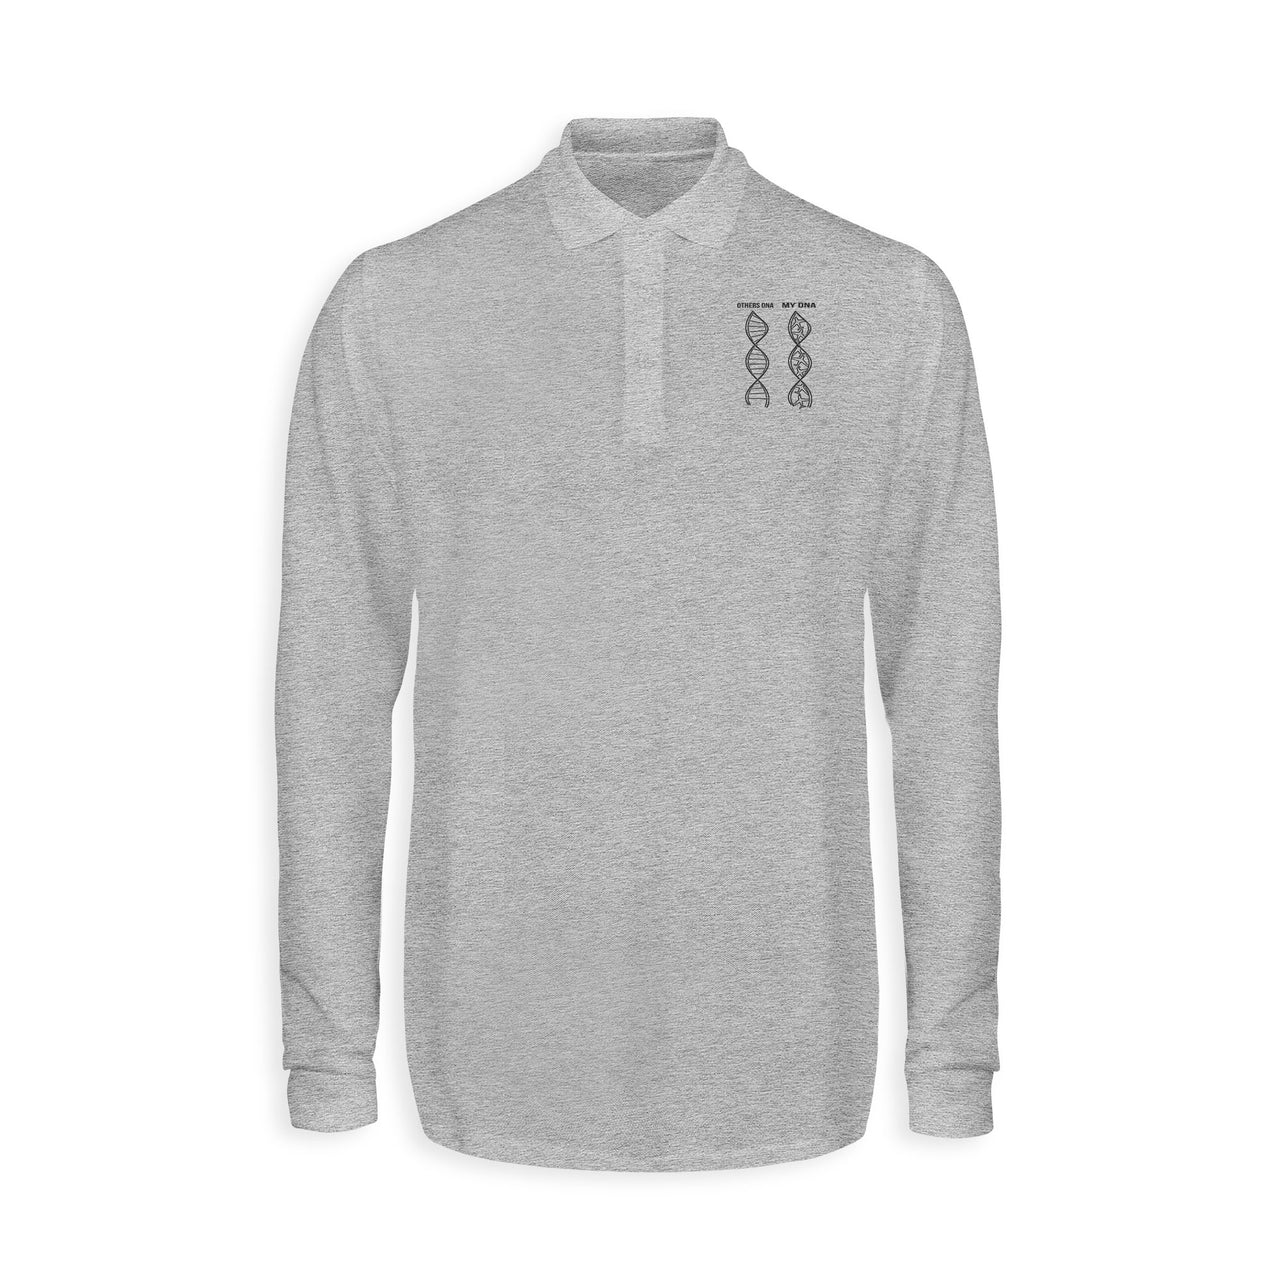 Aviation DNA Designed Long Sleeve Polo T-Shirts